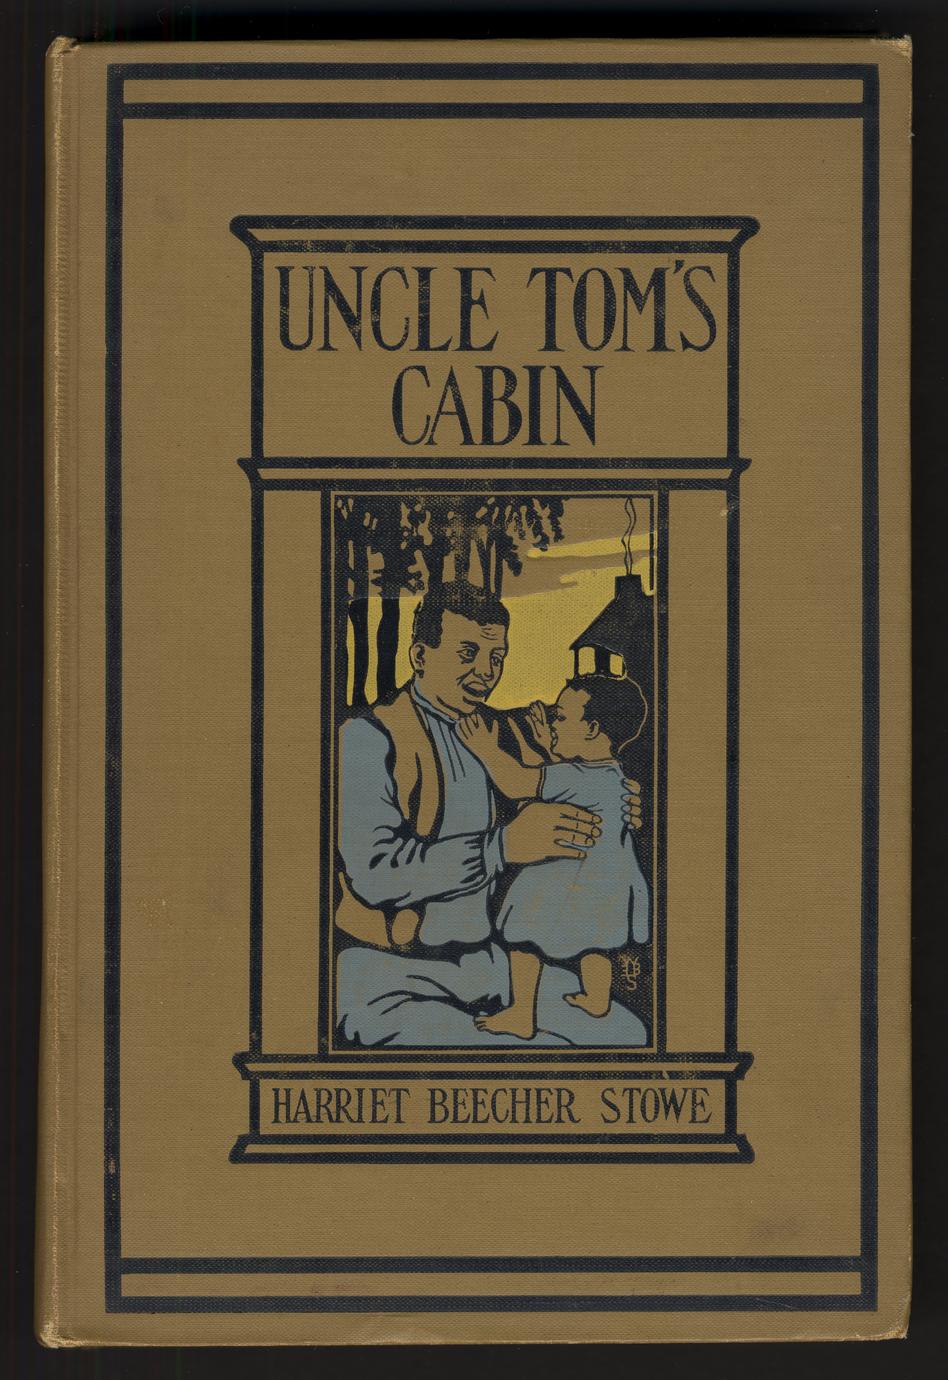 Uncle Tom's cabin : or, Life among the lowly (1 of 3)